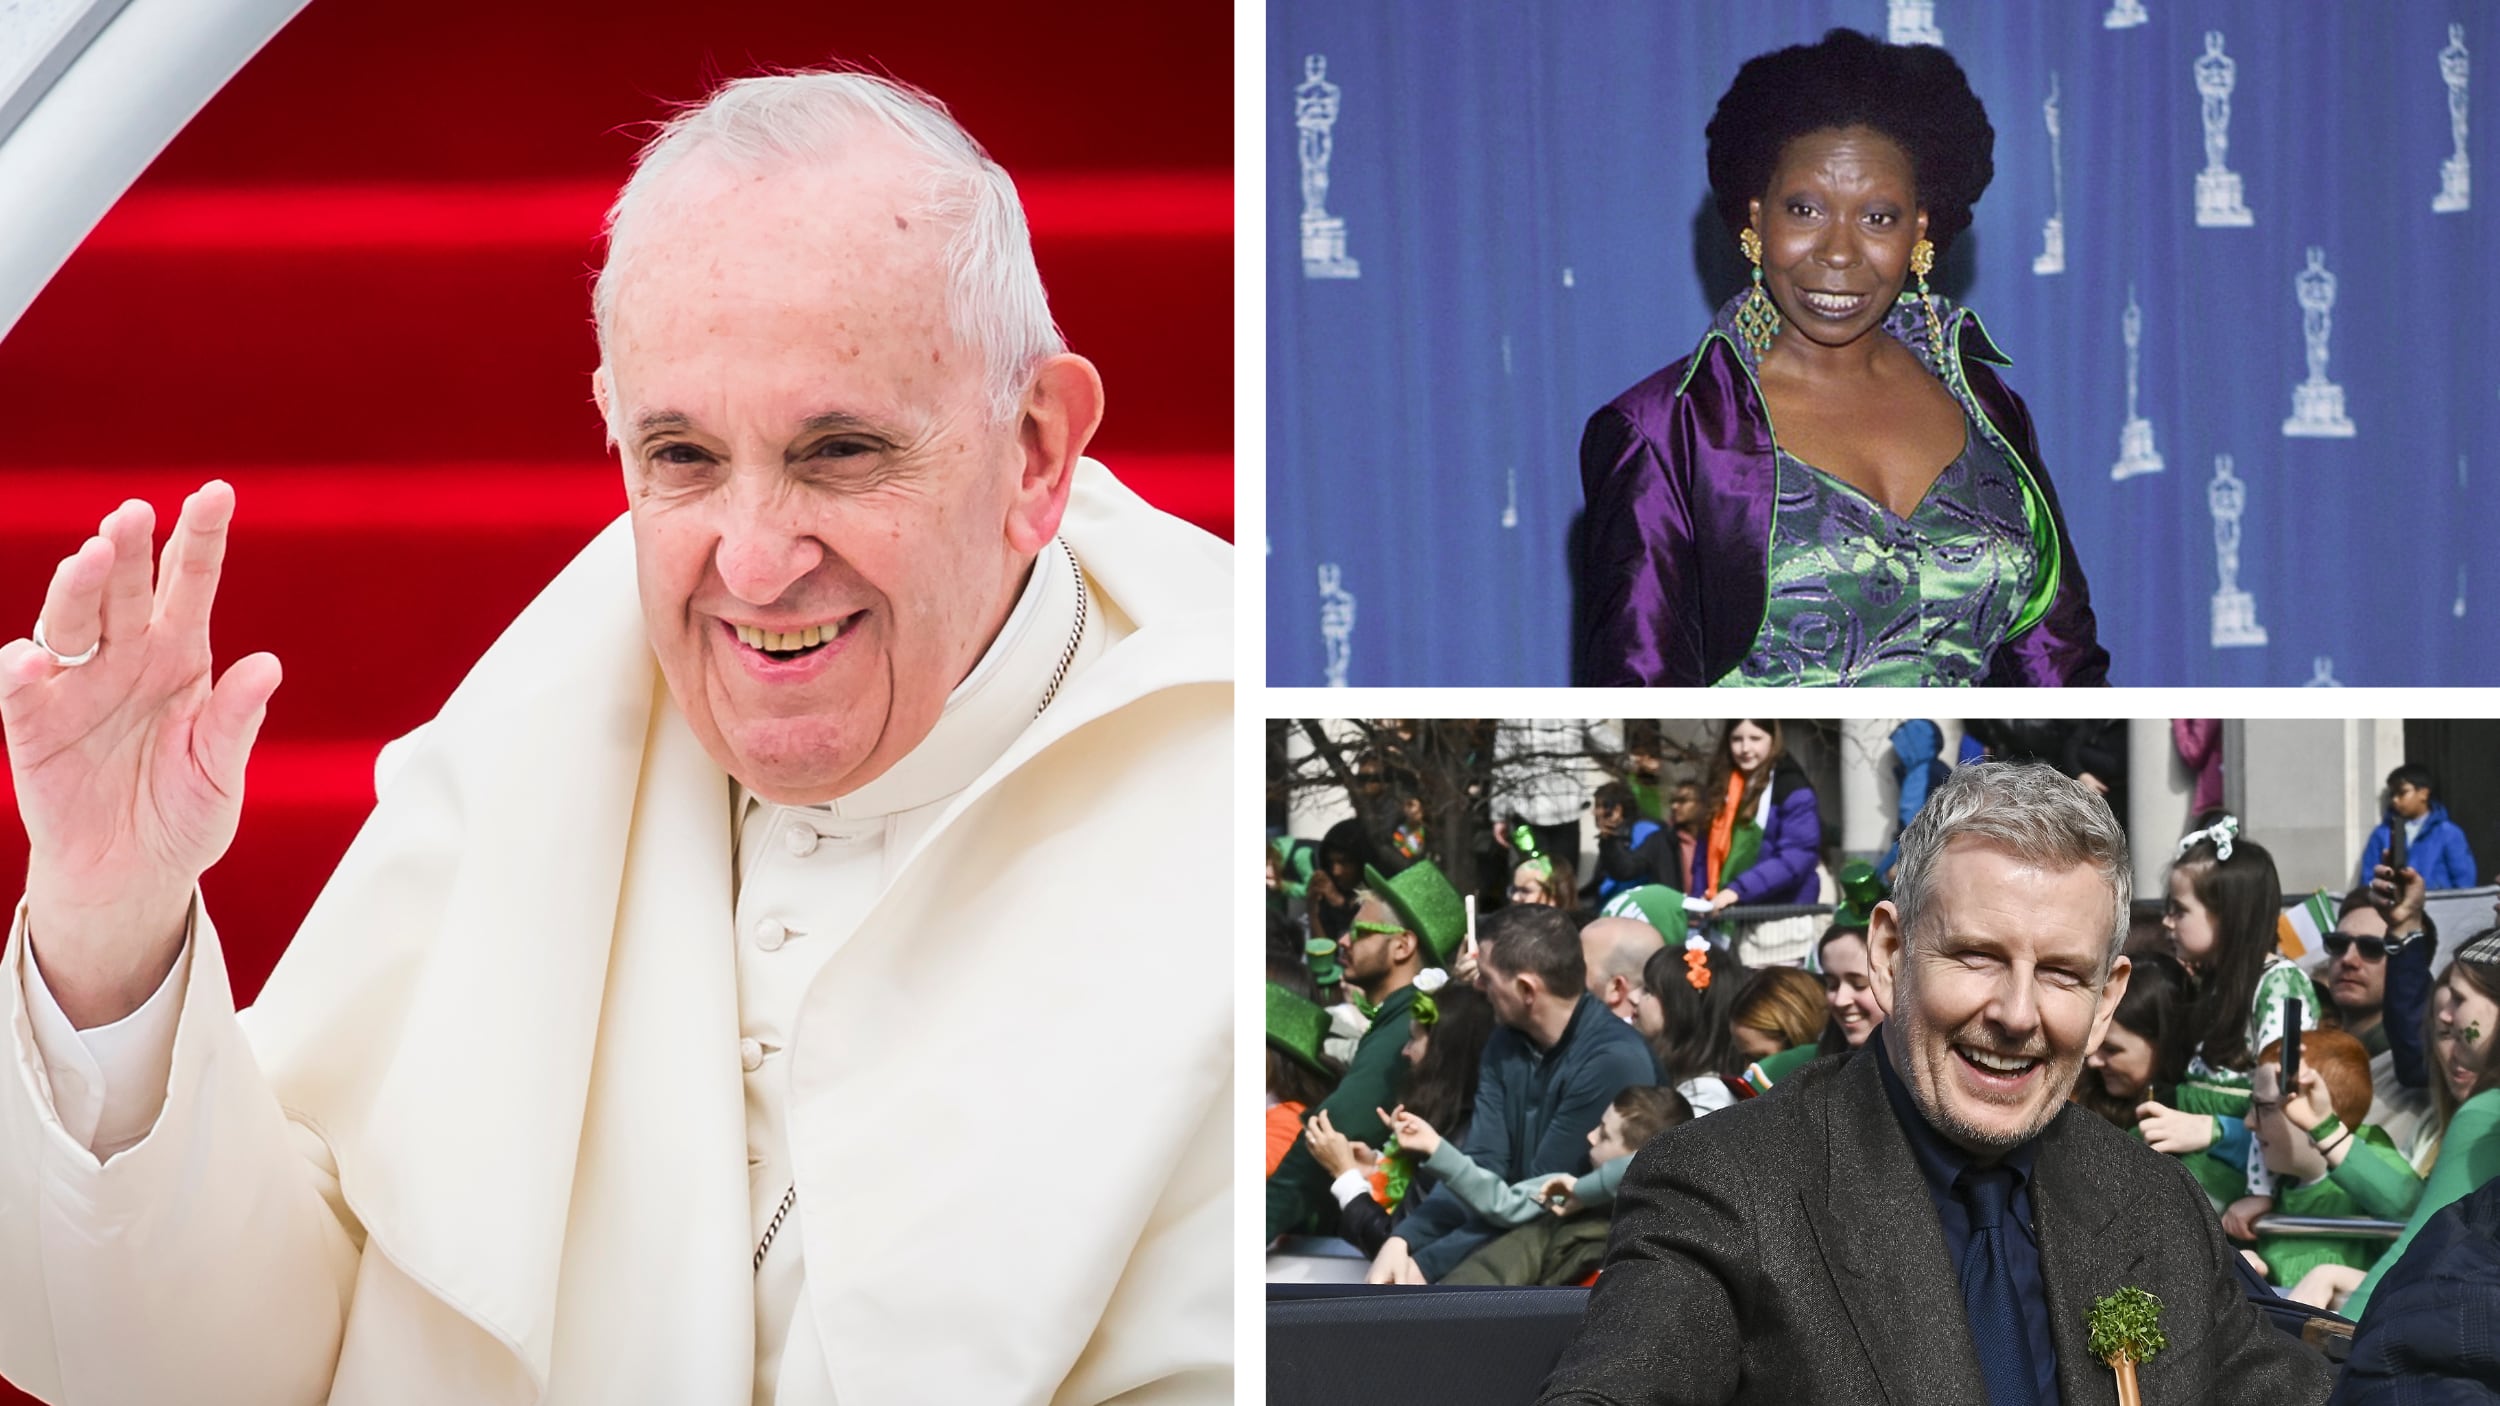 Pope Francis will meet Whoopi Goldberg and Patrick Kielty along with many other entertainers at the Vatican on Friday